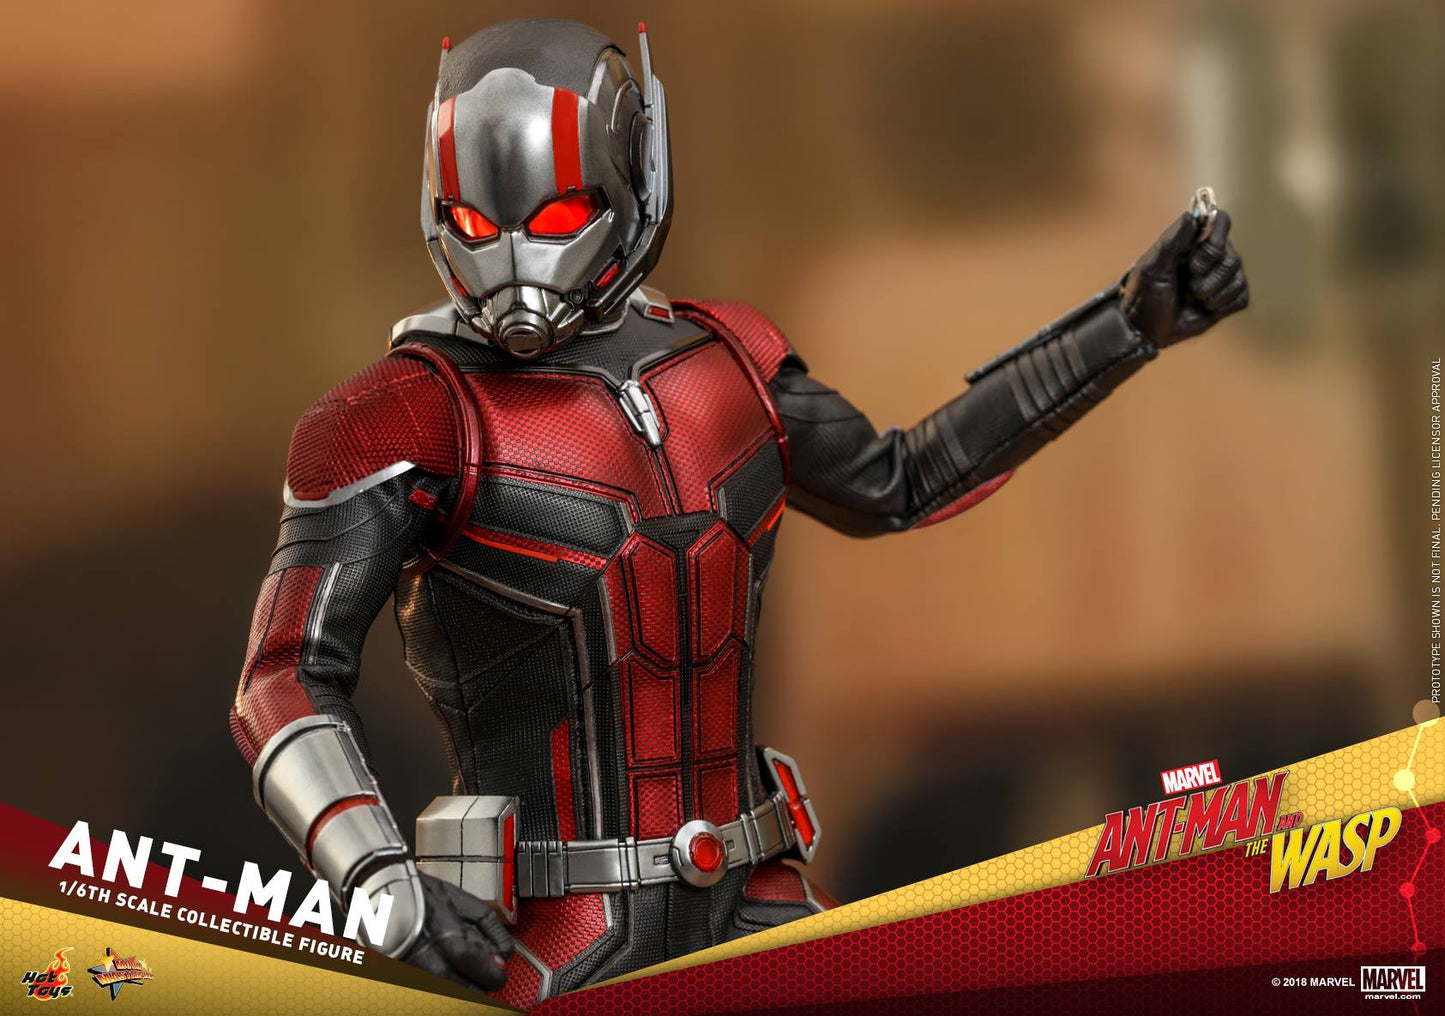 Ant-Man 1/6 - Ant-Man and the Wasp Hot Toys